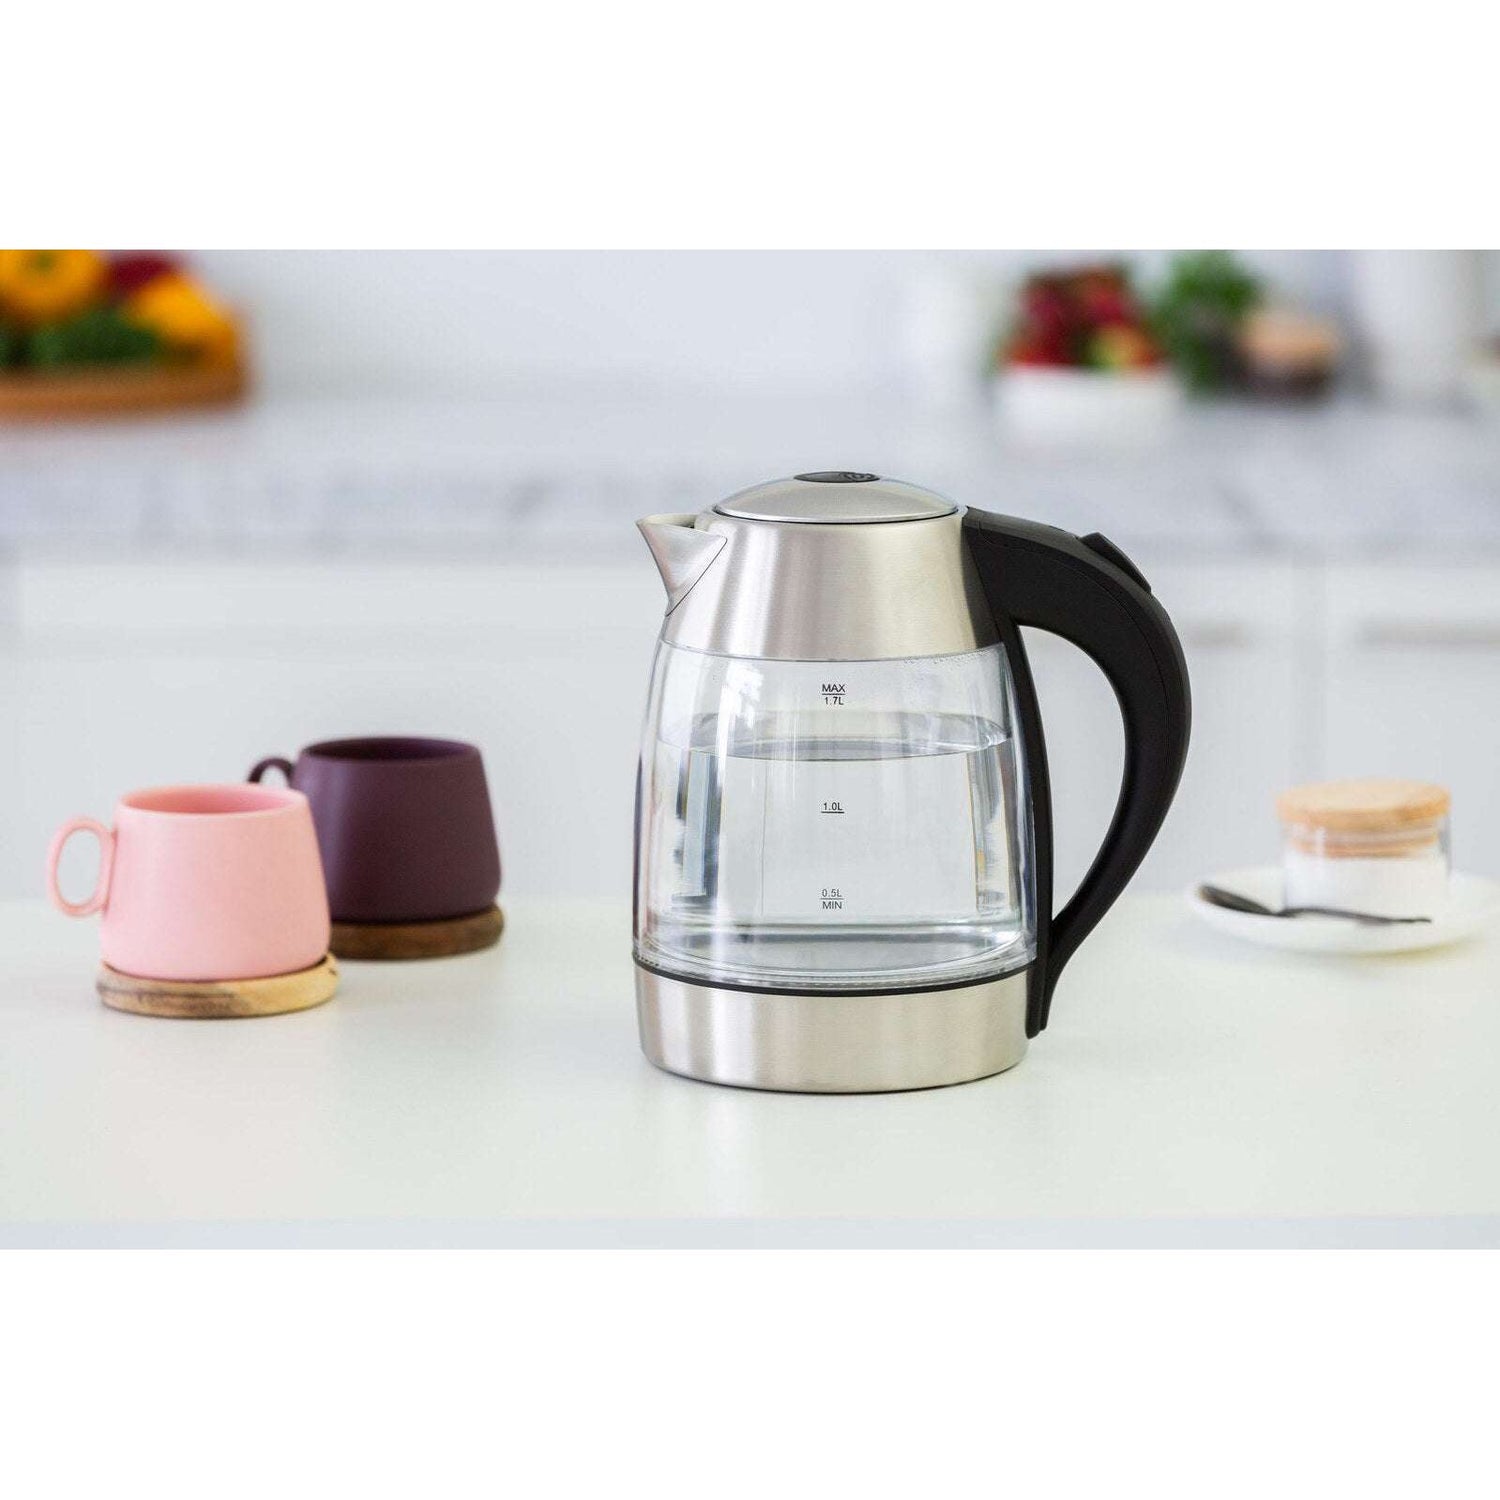 1.7 Litre Glass Kettle with 360 degrees Rotational Base